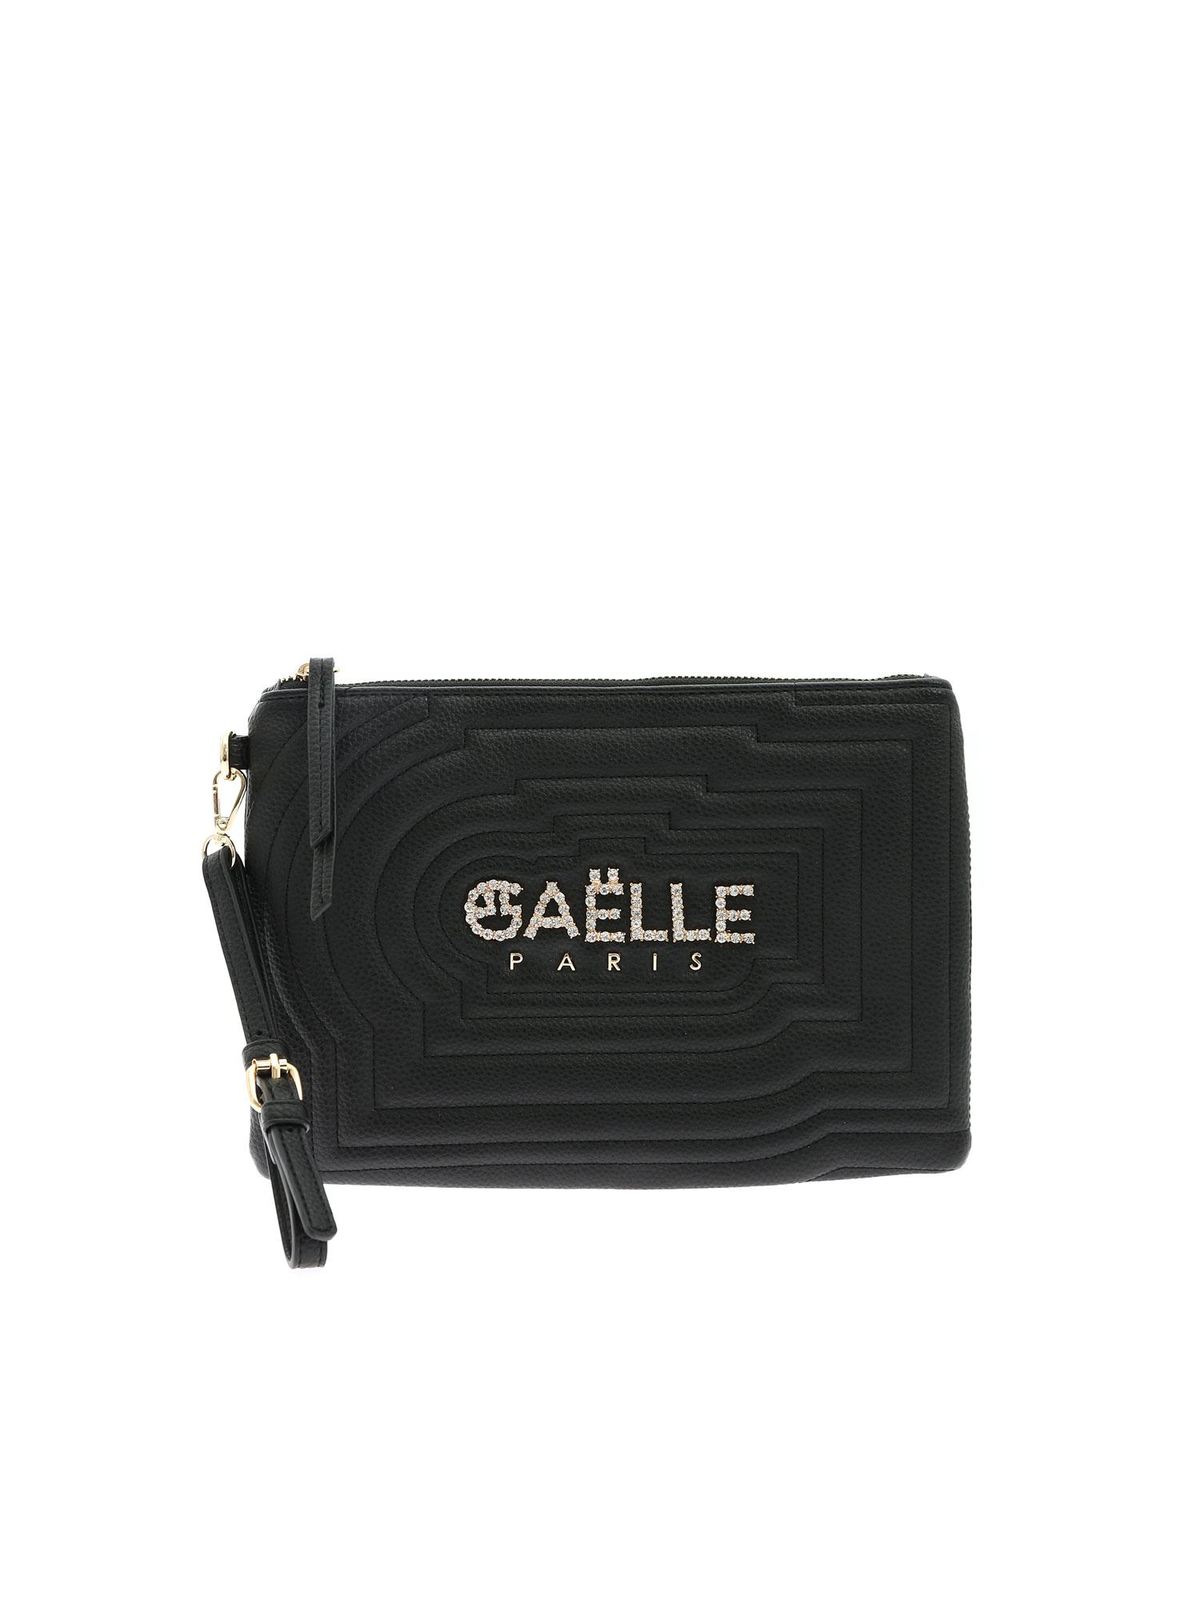 GAELLE PARIS QUILTED CLUTCH BAG WITH RHINESTONE LOGO IN BL